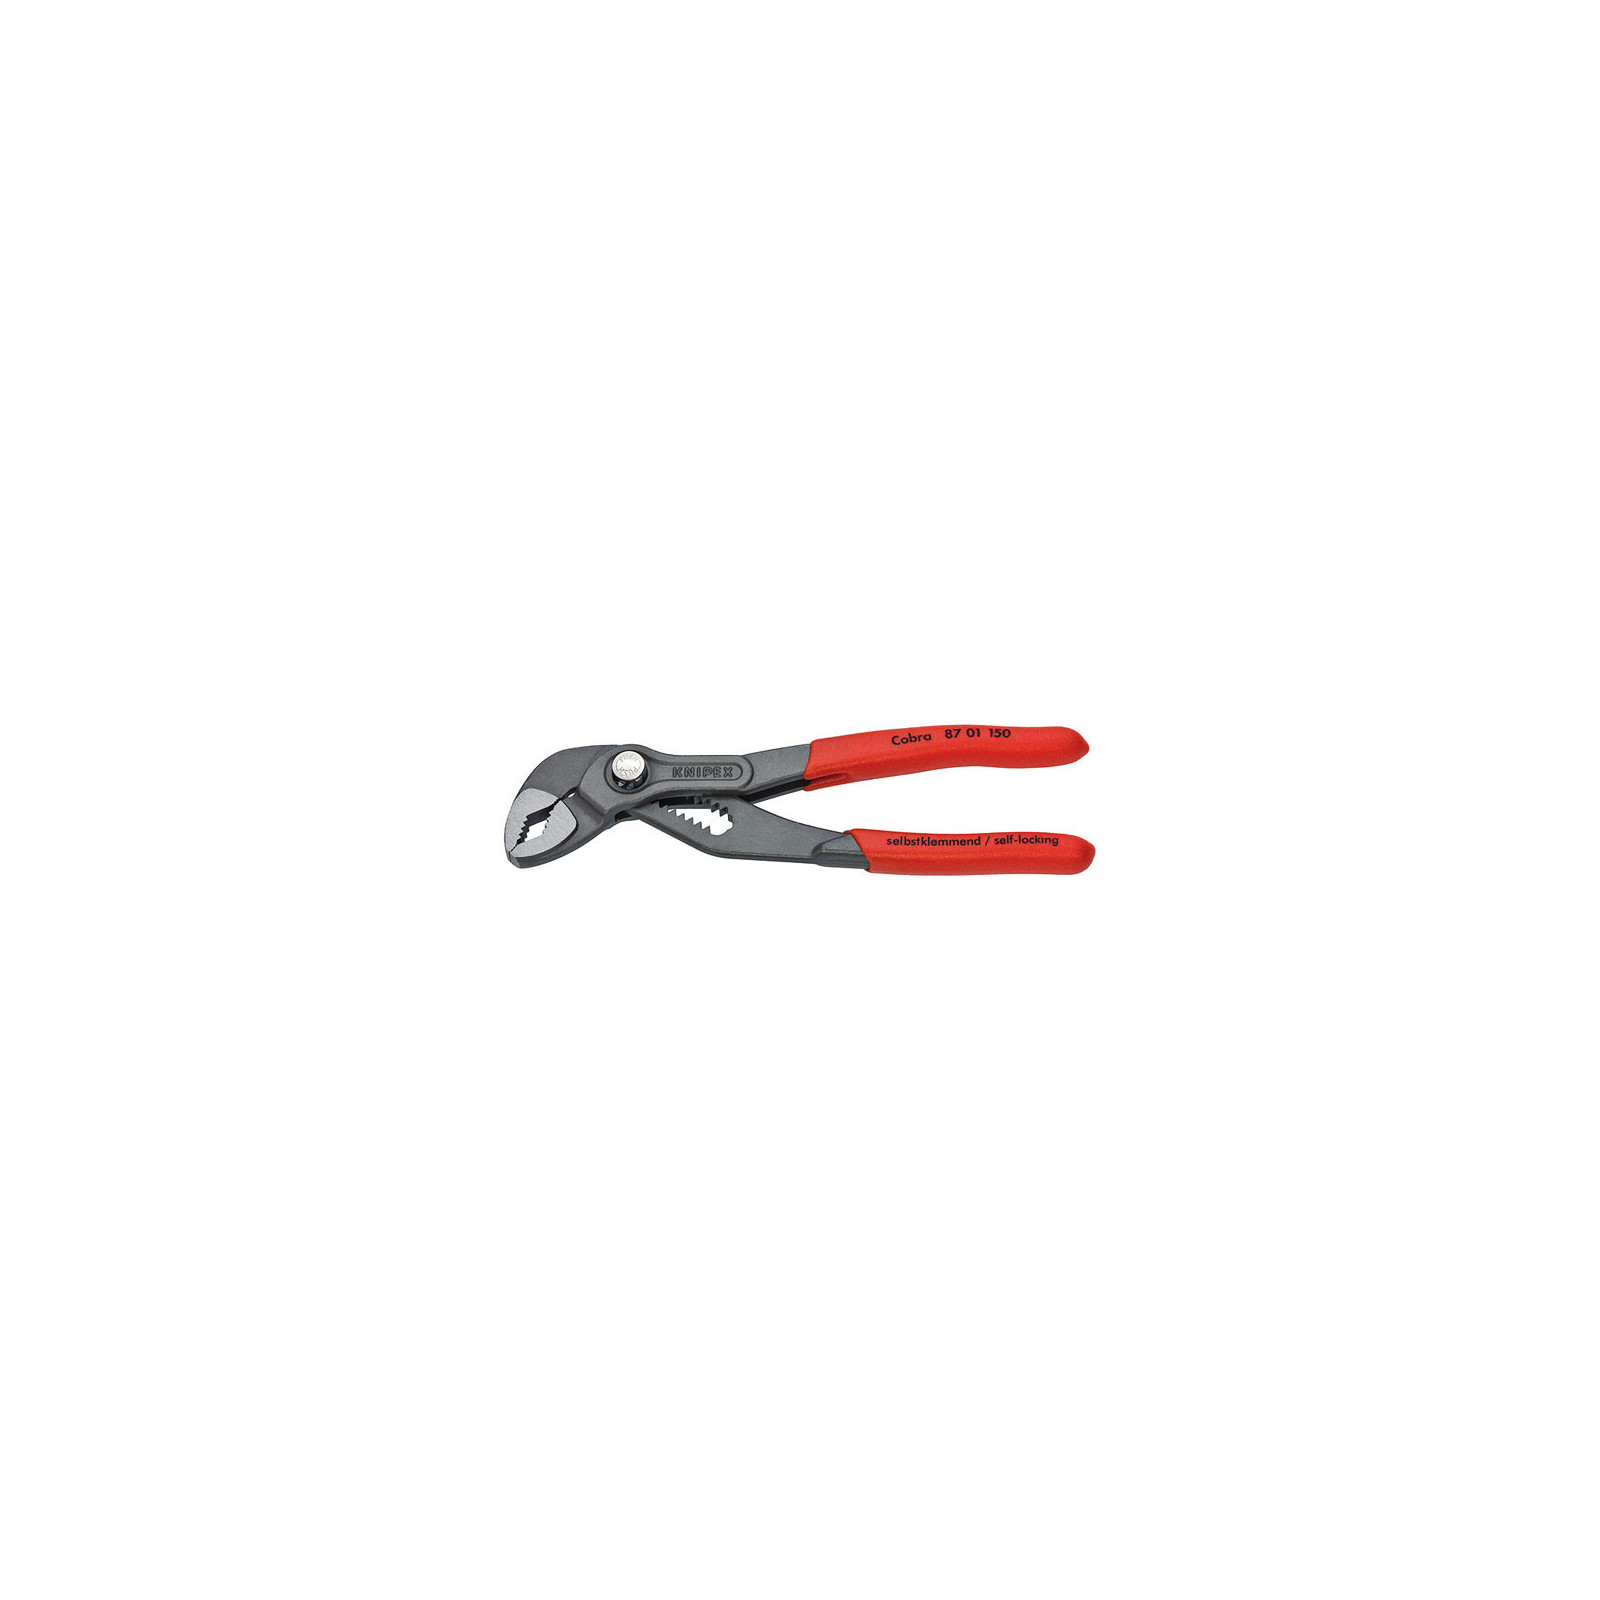 Pince multiprise de pointe 150 MM - Knipex 87.01.150